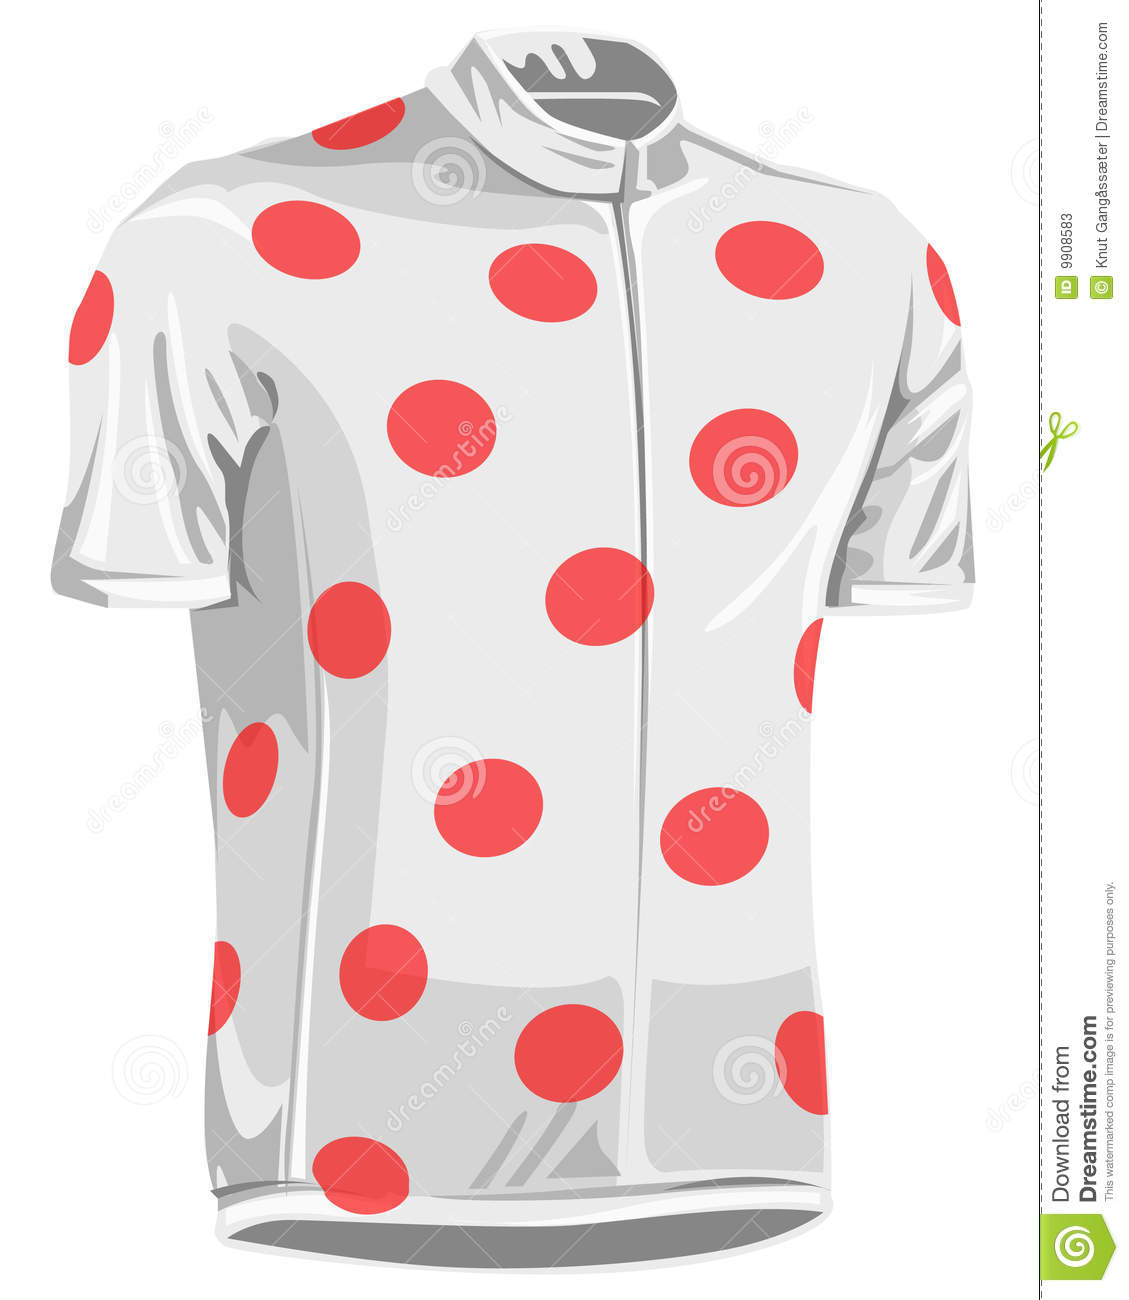     Pattern Bicycle Jersey Used In Tour De France By Professional Riders